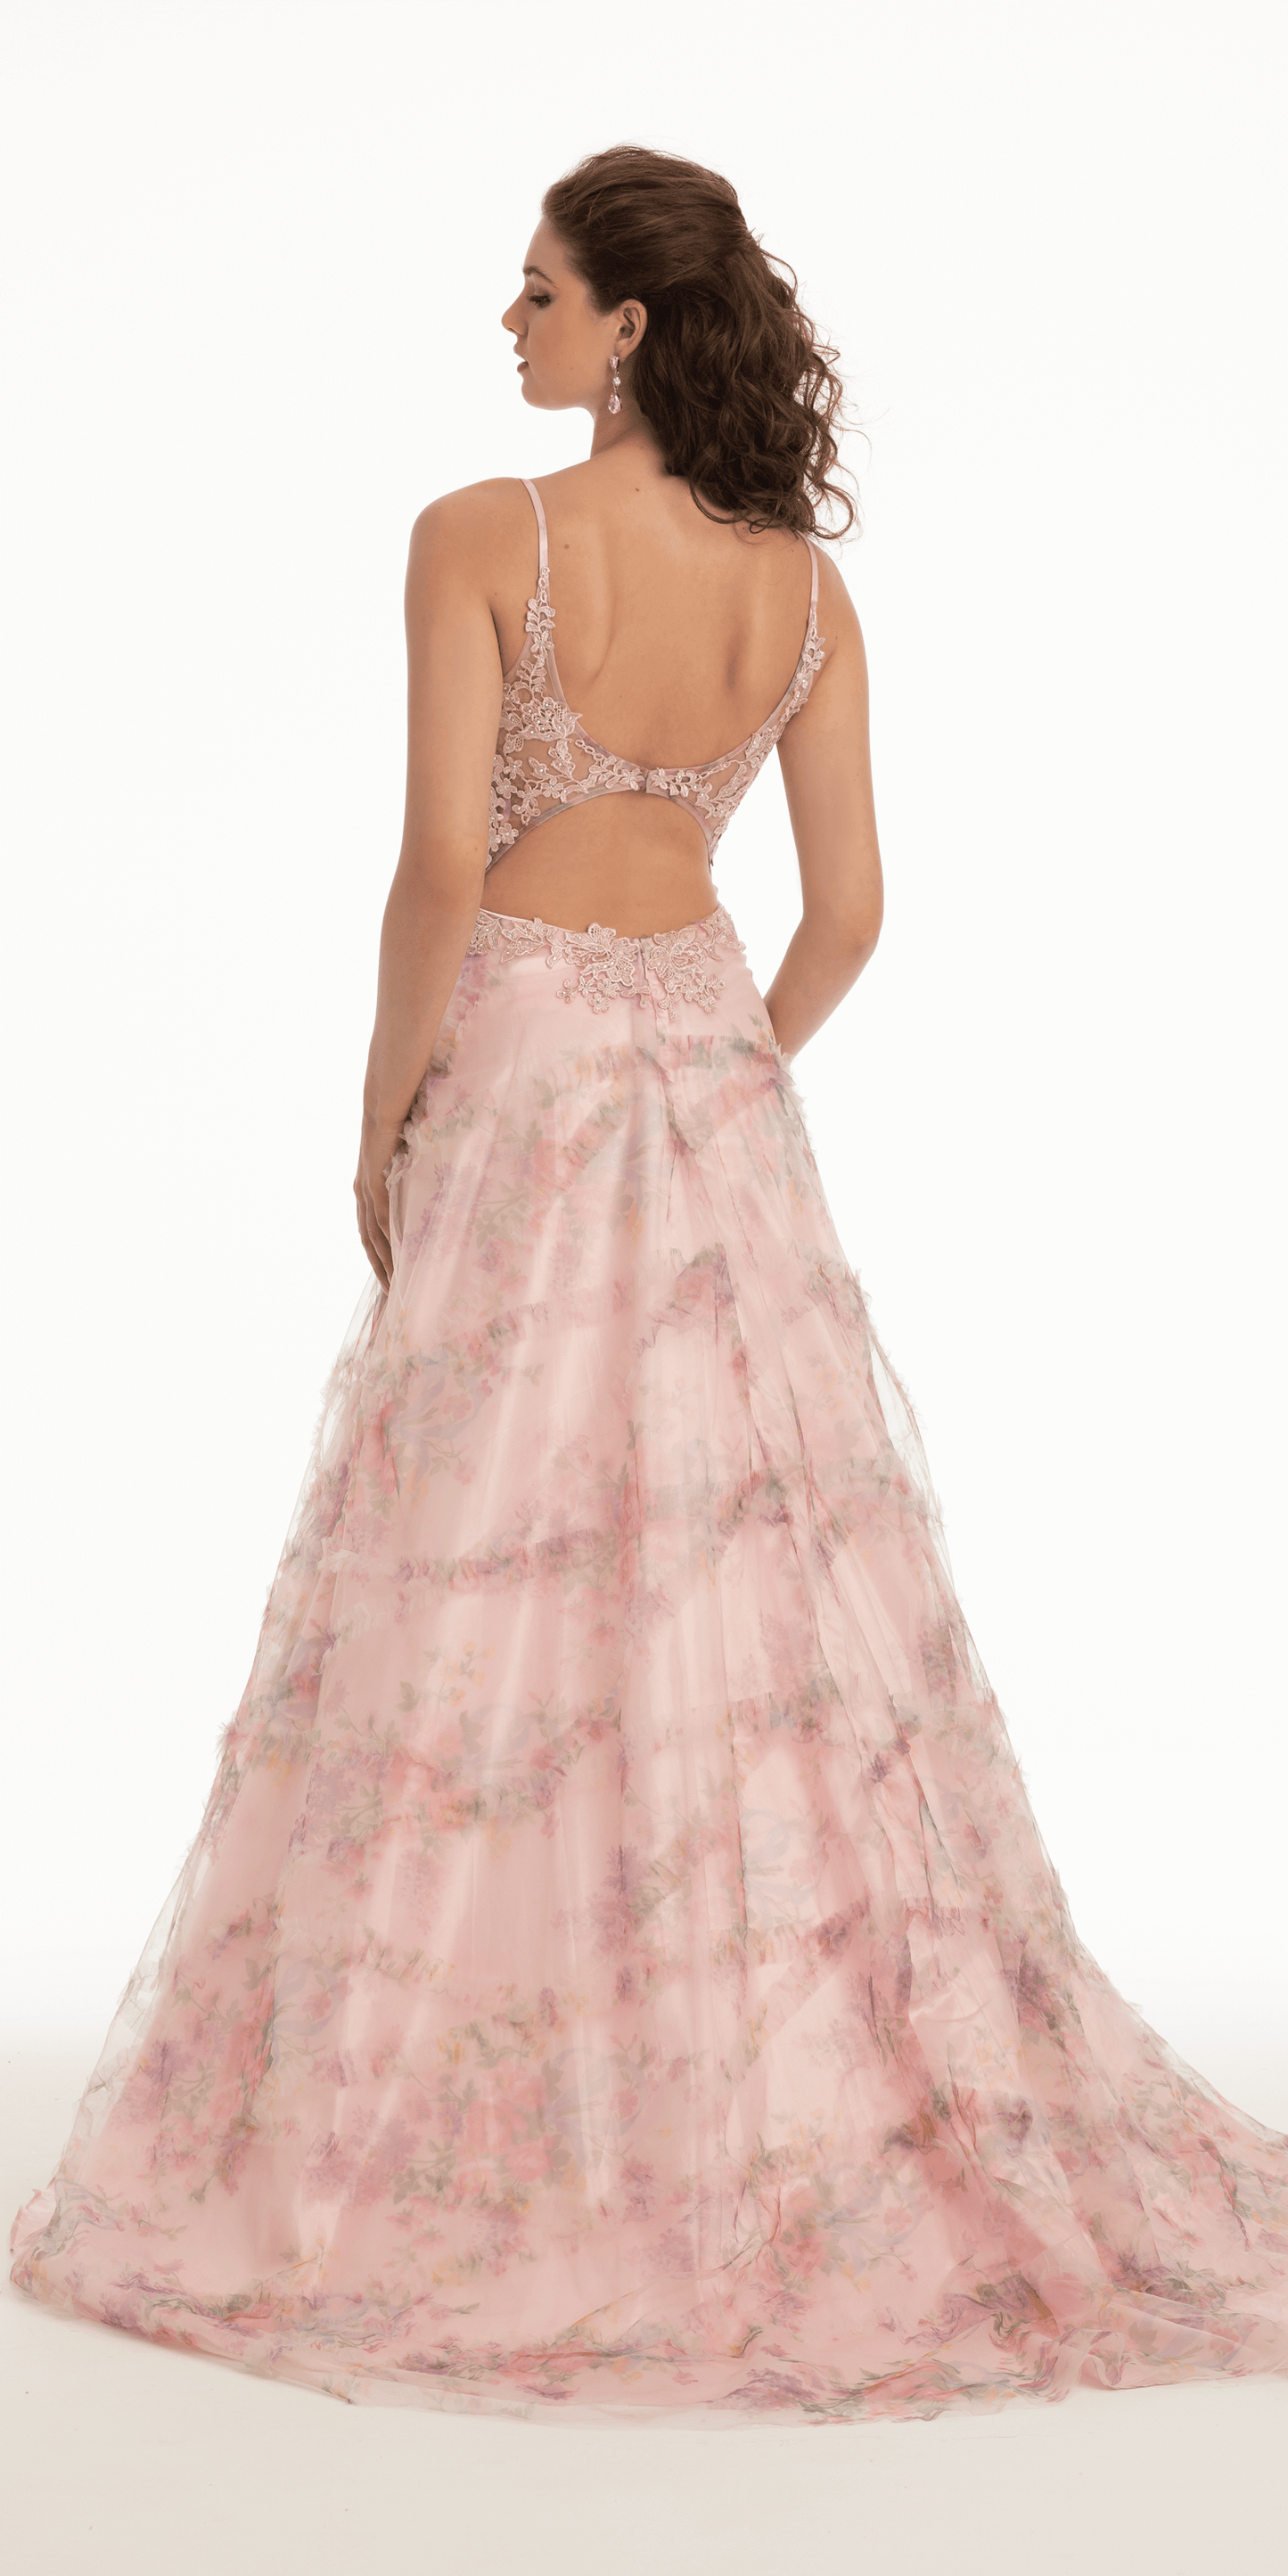 Camille La Vie Sweetheart Embroidered Tulle Print A Line Dress with Keyhole Back